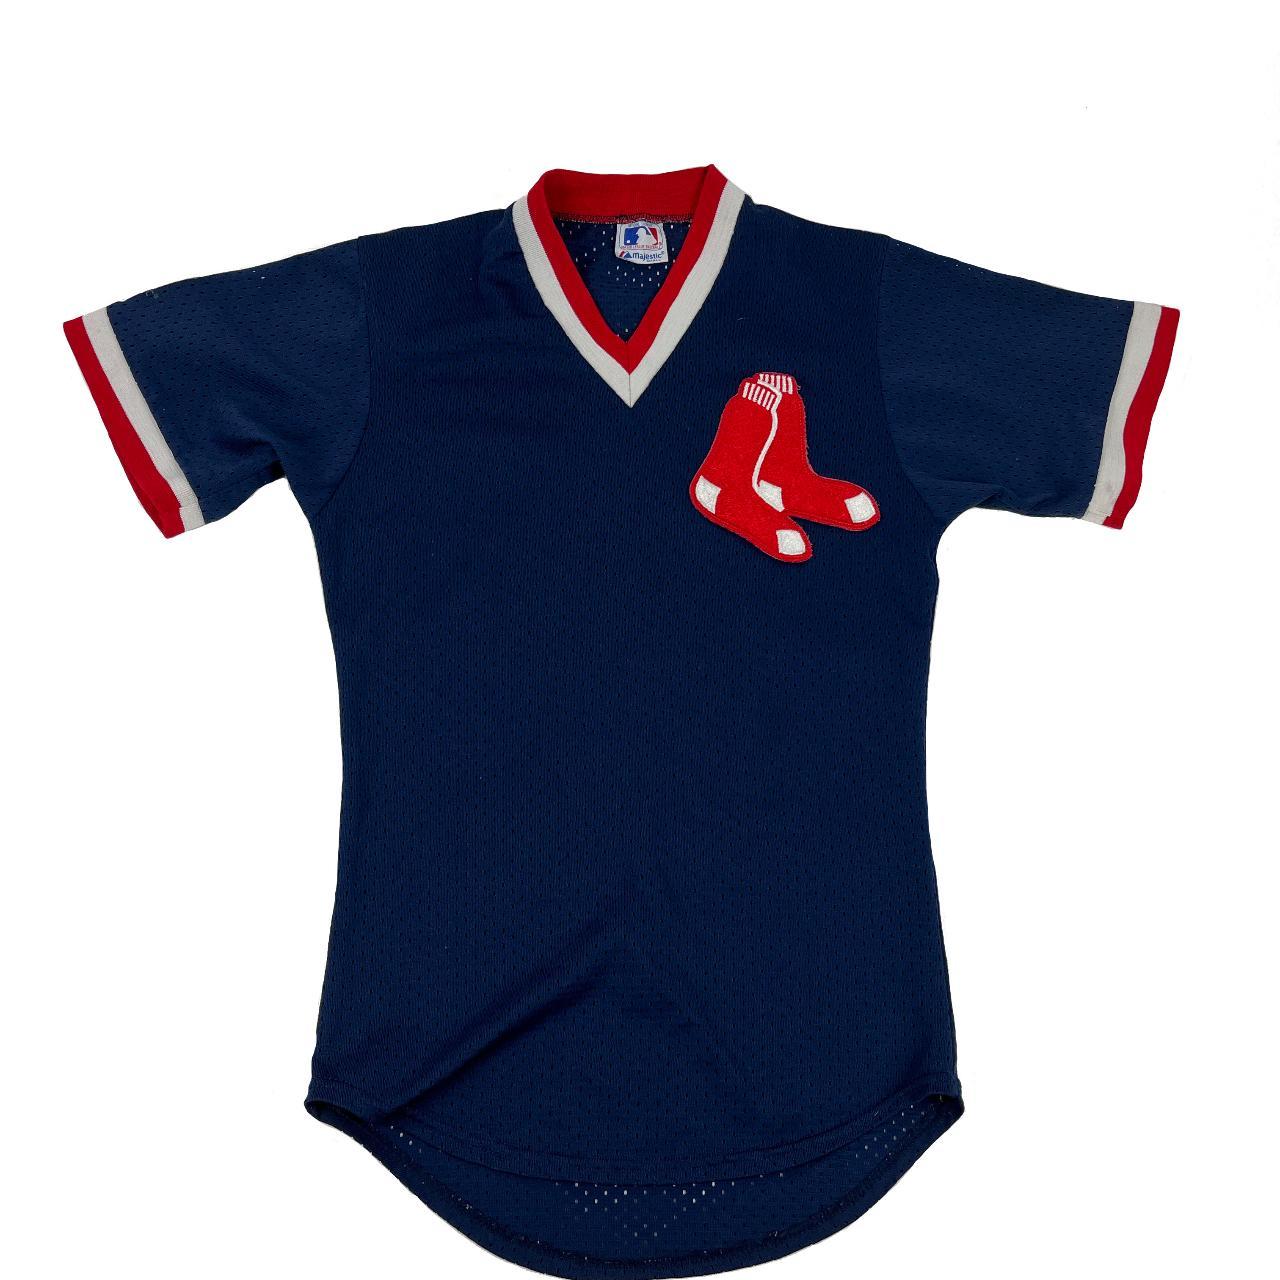 red sox jersey small